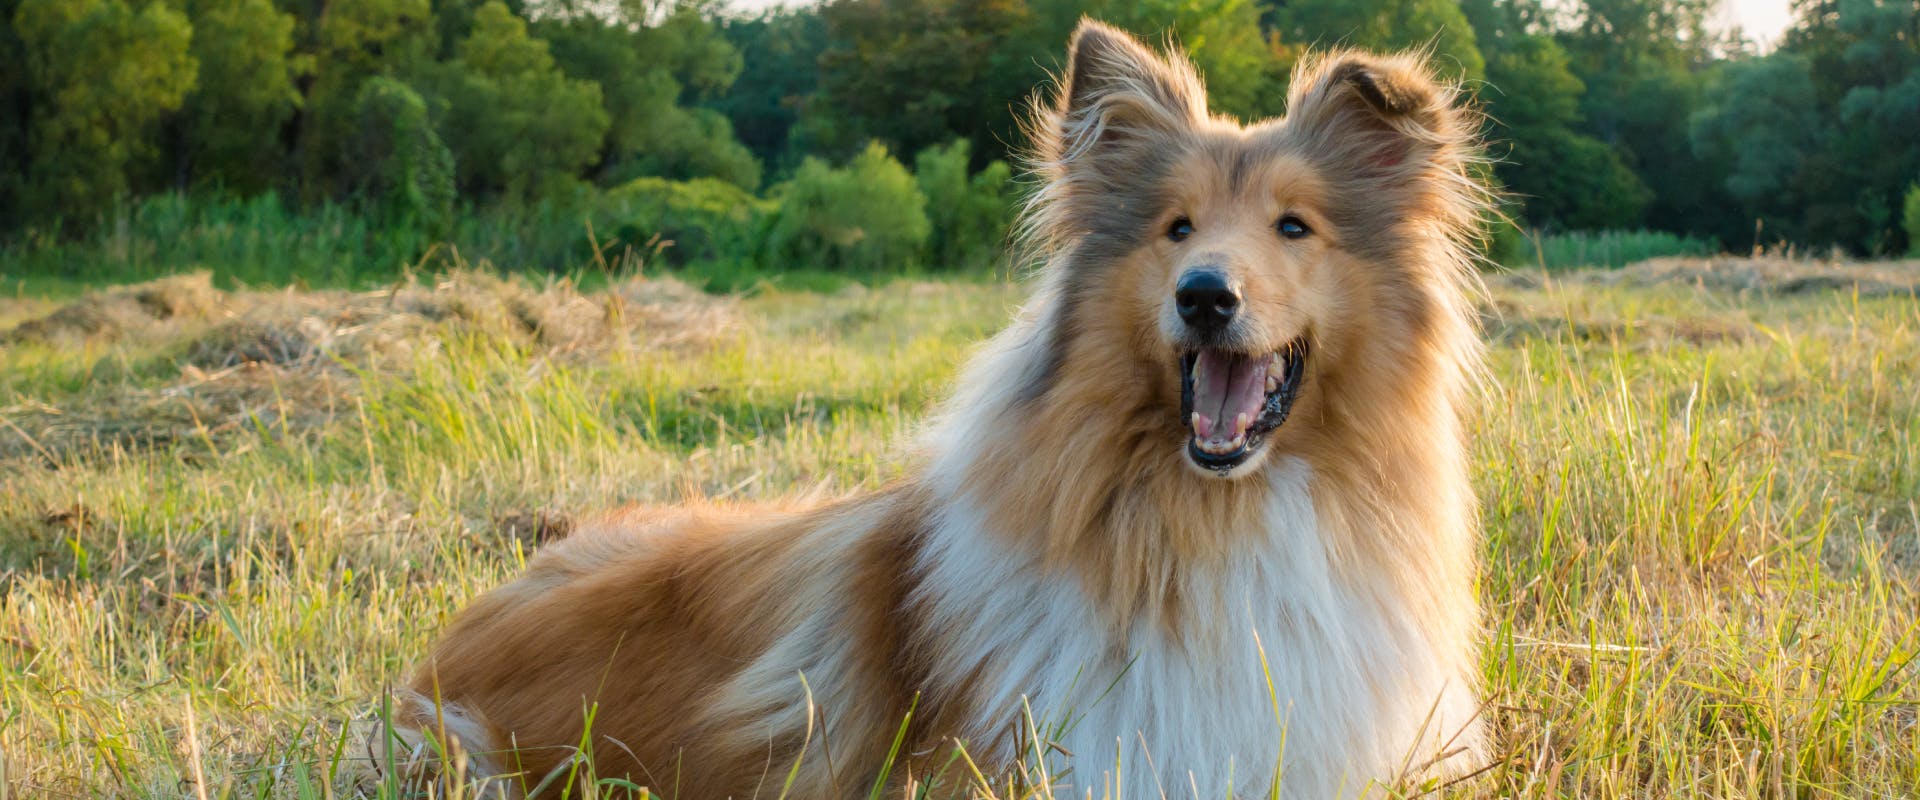 a sable coated long haired rough collie sat in a grassy field